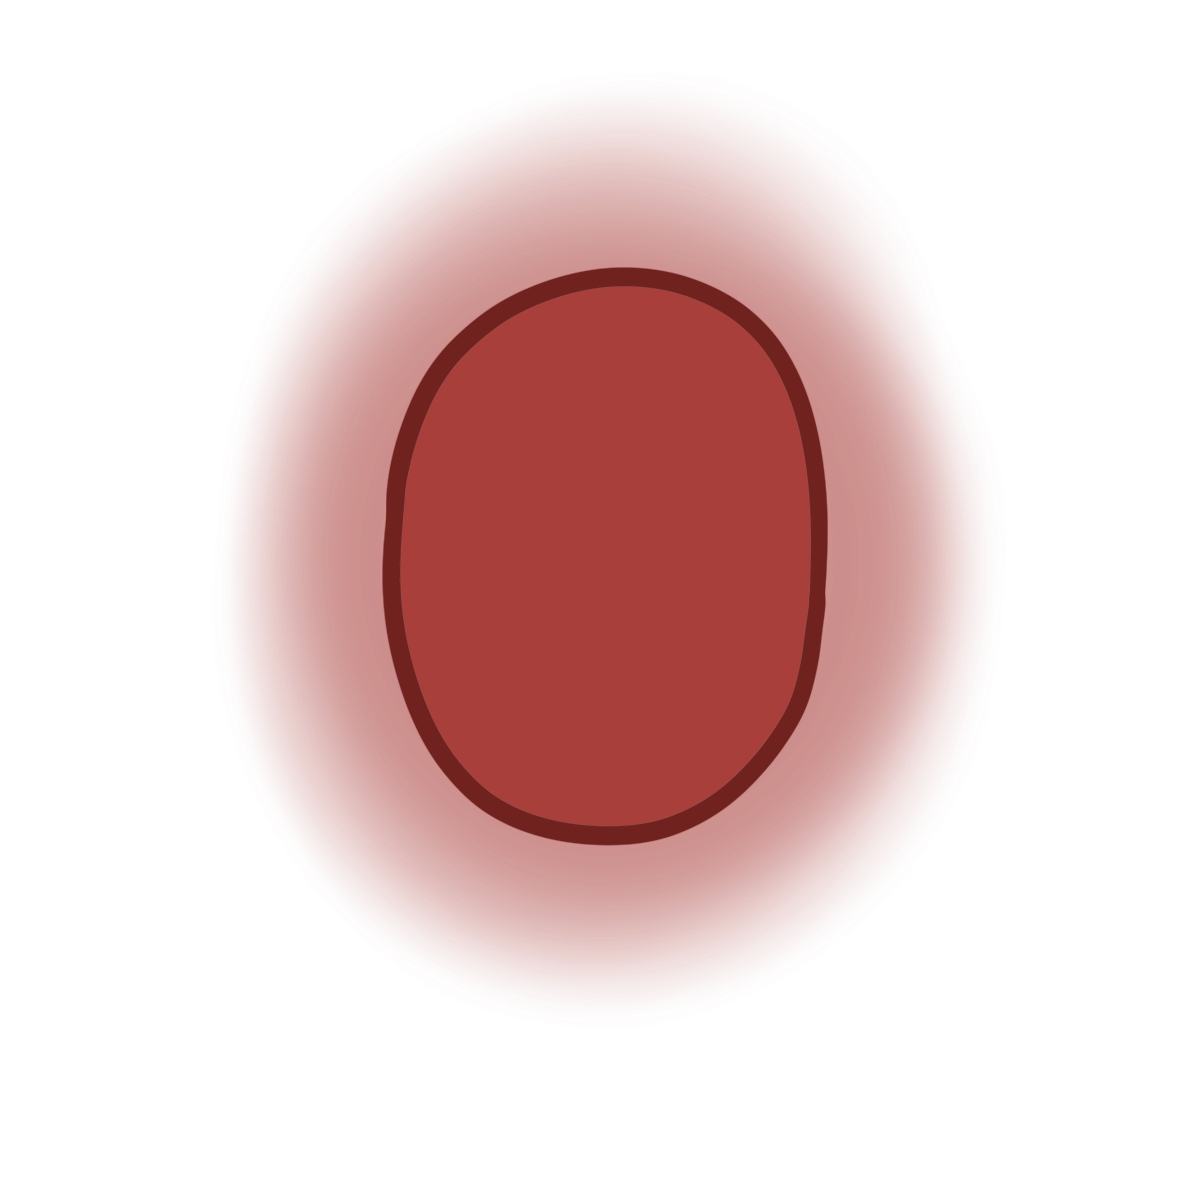 A glowing red oval.